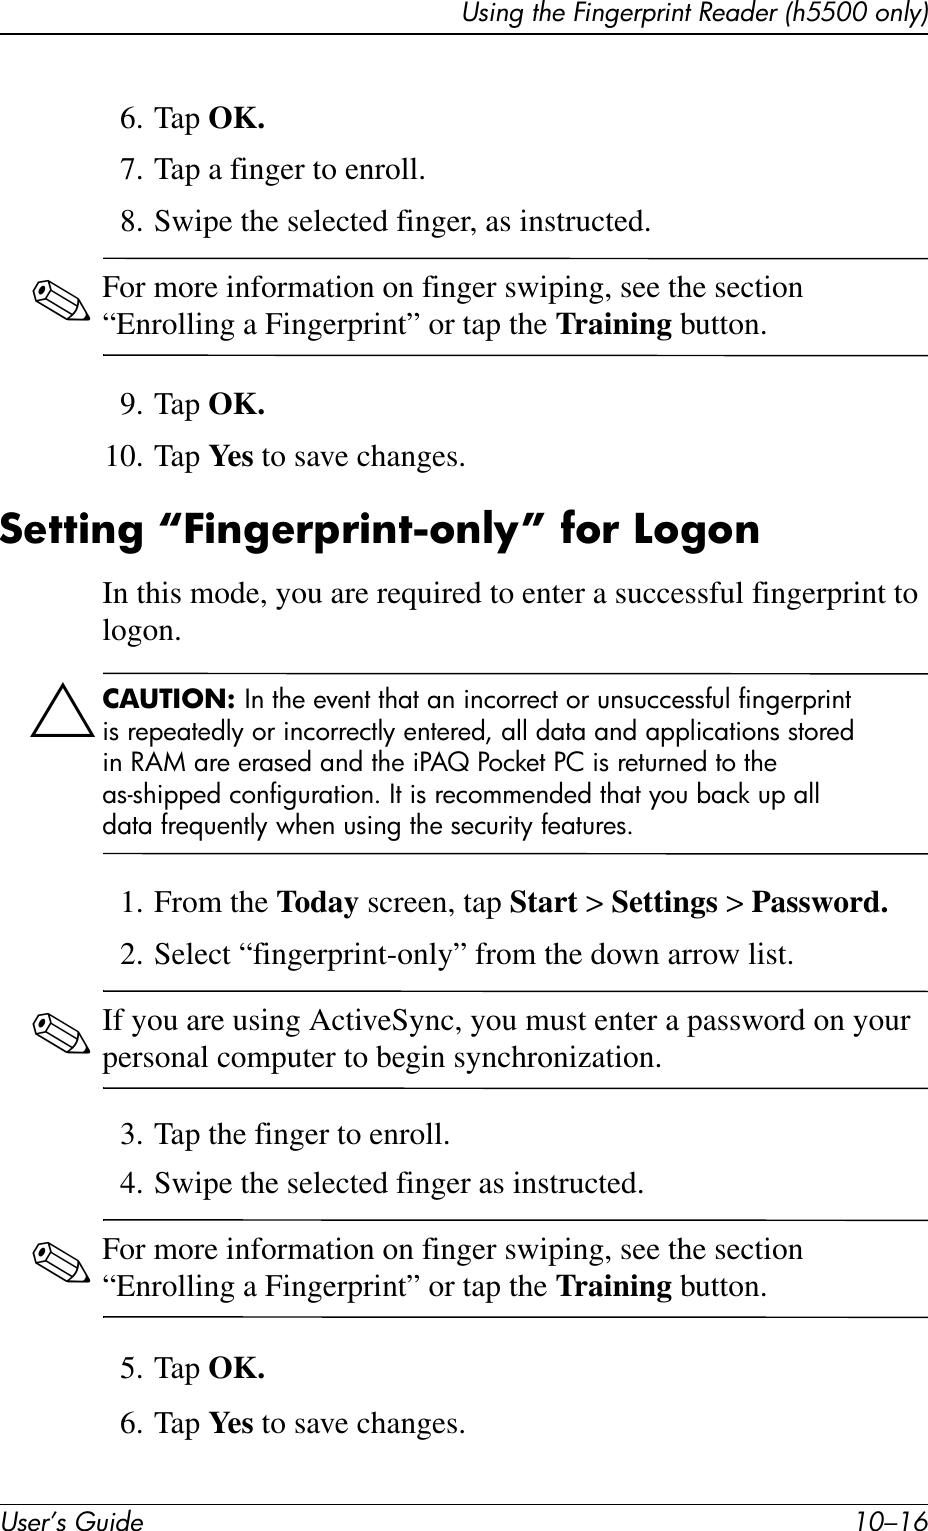 User’s Guide 10–16Using the Fingerprint Reader (h5500 only)6. Tap OK.7. Tap a finger to enroll.8. Swipe the selected finger, as instructed. ✎For more information on finger swiping, see the section “Enrolling a Fingerprint” or tap the Training button.9. Tap OK.10. Tap Ye s  to save changes.Setting “Fingerprint-only” for LogonIn this mode, you are required to enter a successful fingerprint to logon.ÄCAUTION: In the event that an incorrect or unsuccessful fingerprint is repeatedly or incorrectly entered, all data and applications stored in RAM are erased and the iPAQ Pocket PC is returned to the as-shipped configuration. It is recommended that you back up all data frequently when using the security features.1. From the Today screen, tap Start &gt; Settings &gt; Password.2. Select “fingerprint-only” from the down arrow list.✎If you are using ActiveSync, you must enter a password on your personal computer to begin synchronization.3. Tap the finger to enroll.4. Swipe the selected finger as instructed.✎For more information on finger swiping, see the section “Enrolling a Fingerprint” or tap the Training button.5. Tap OK.6. Tap Ye s  to save changes.